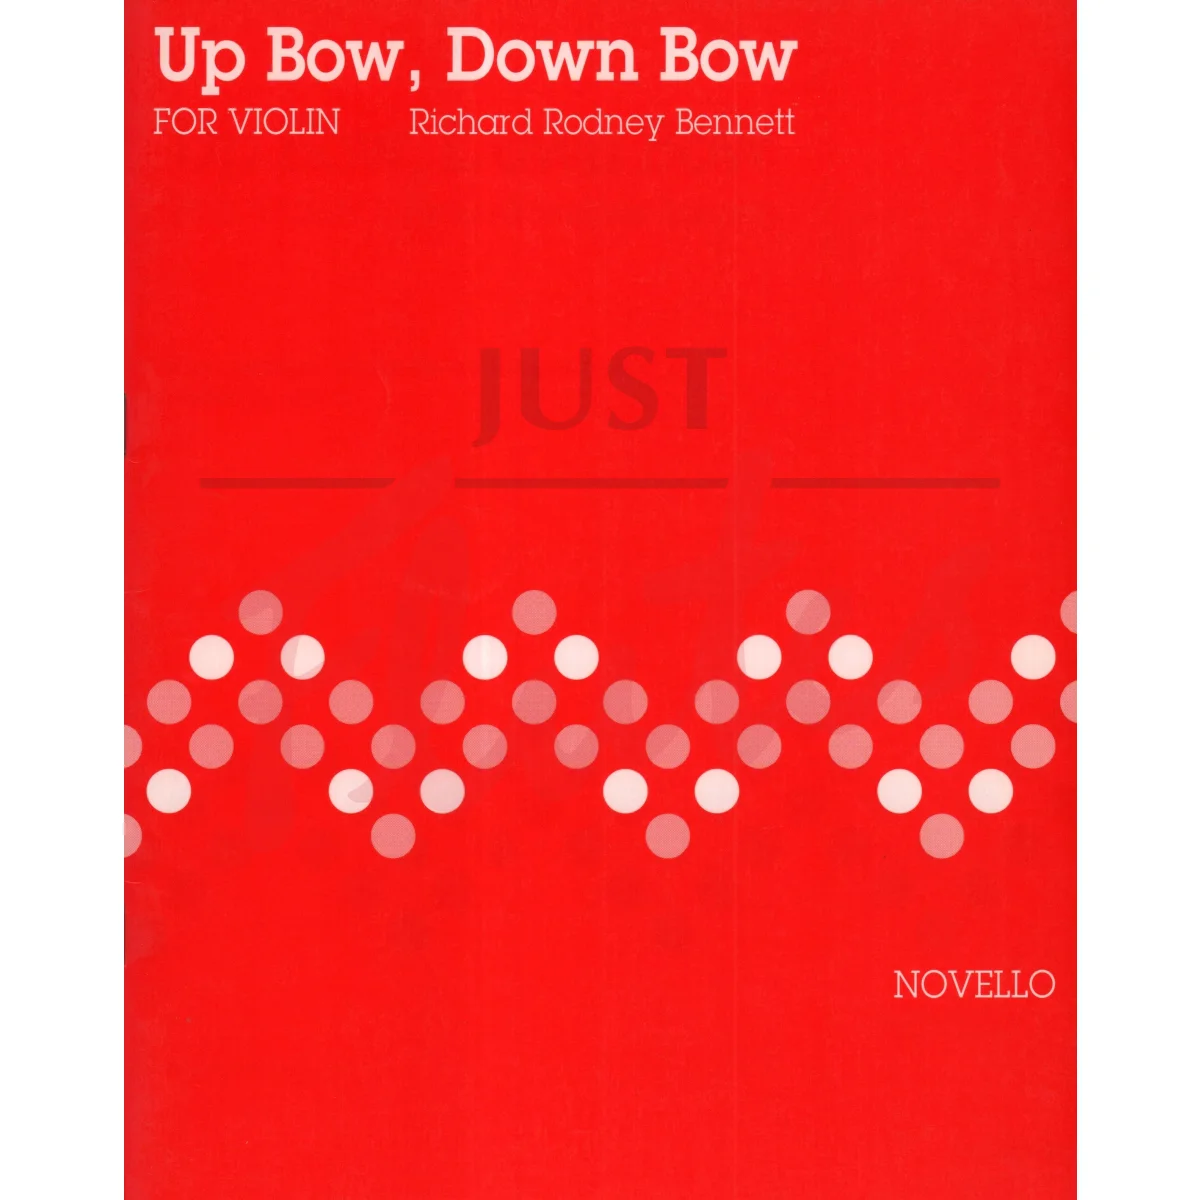 Up Bow, Down Bow